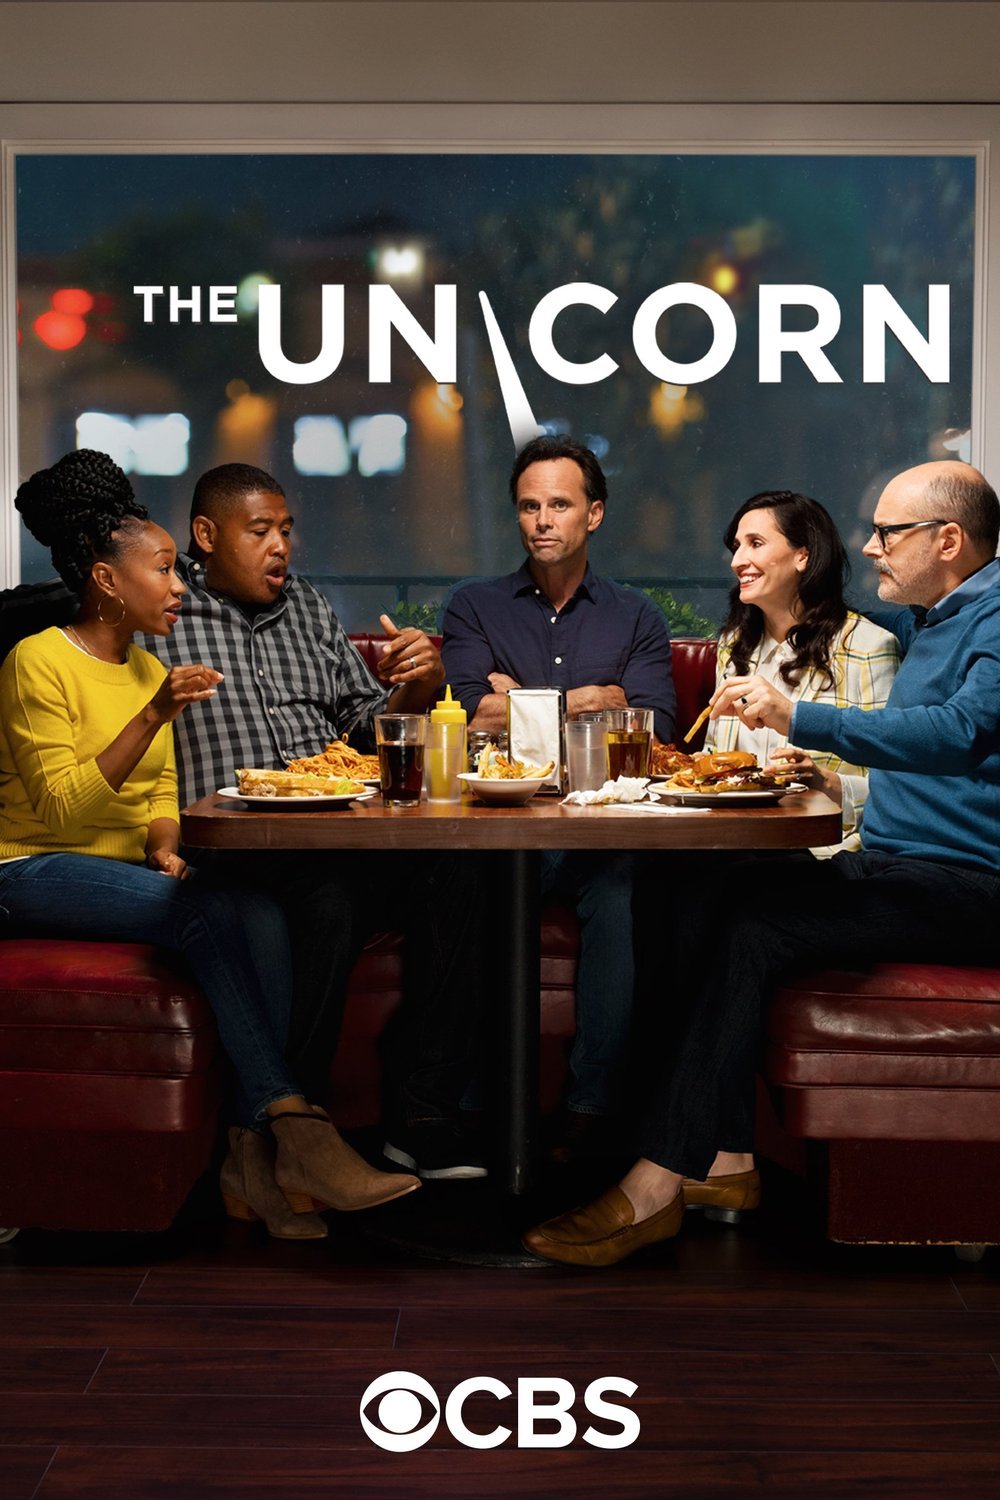 Poster of the movie The Unicorn